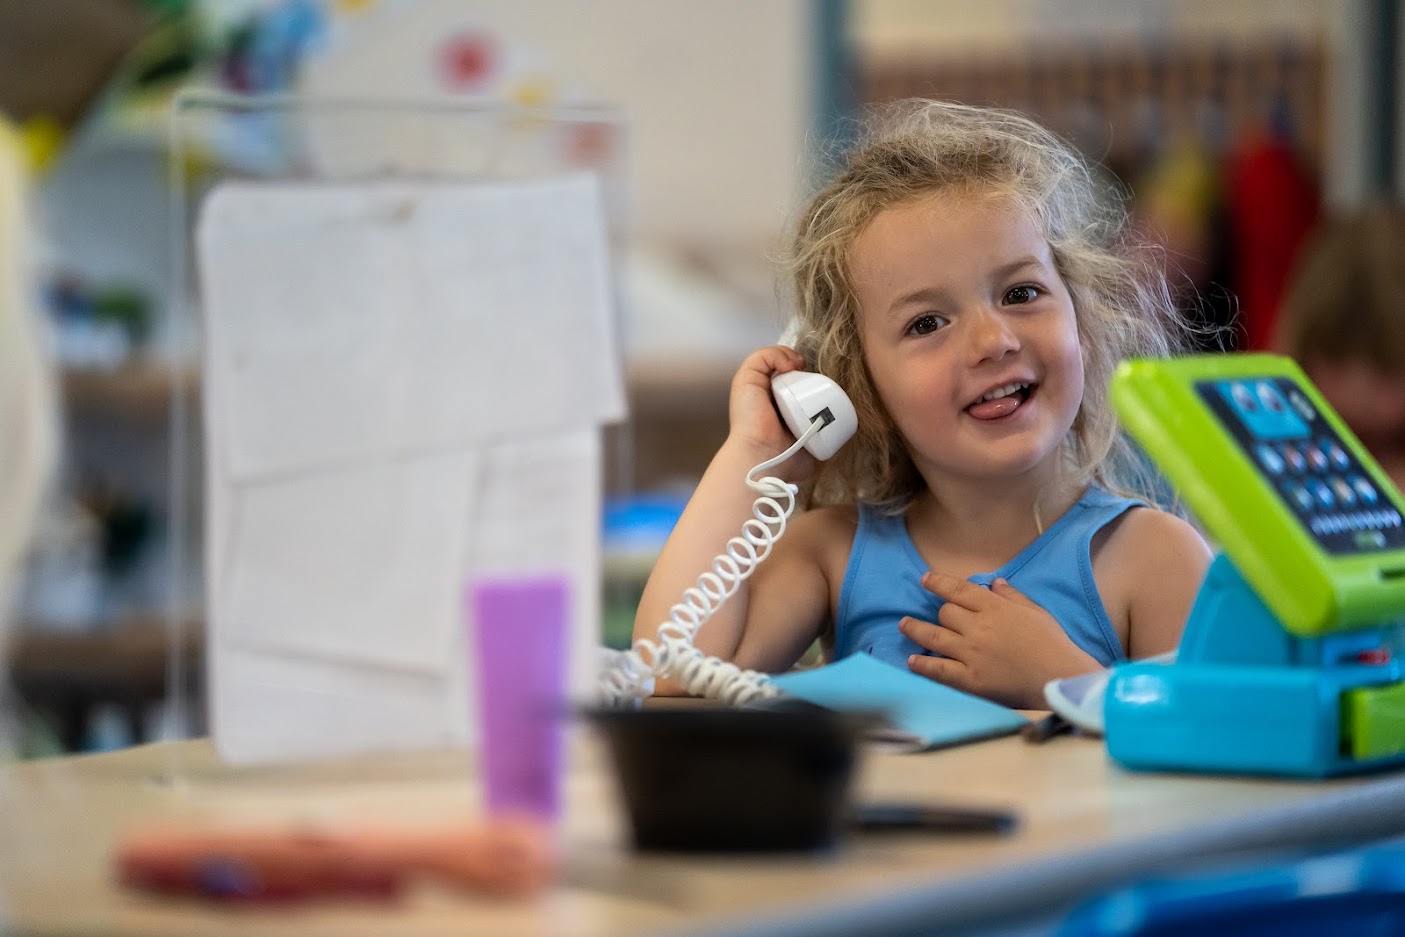 A preschool girl plays with a toy telephone to her ear and a smile on her face.